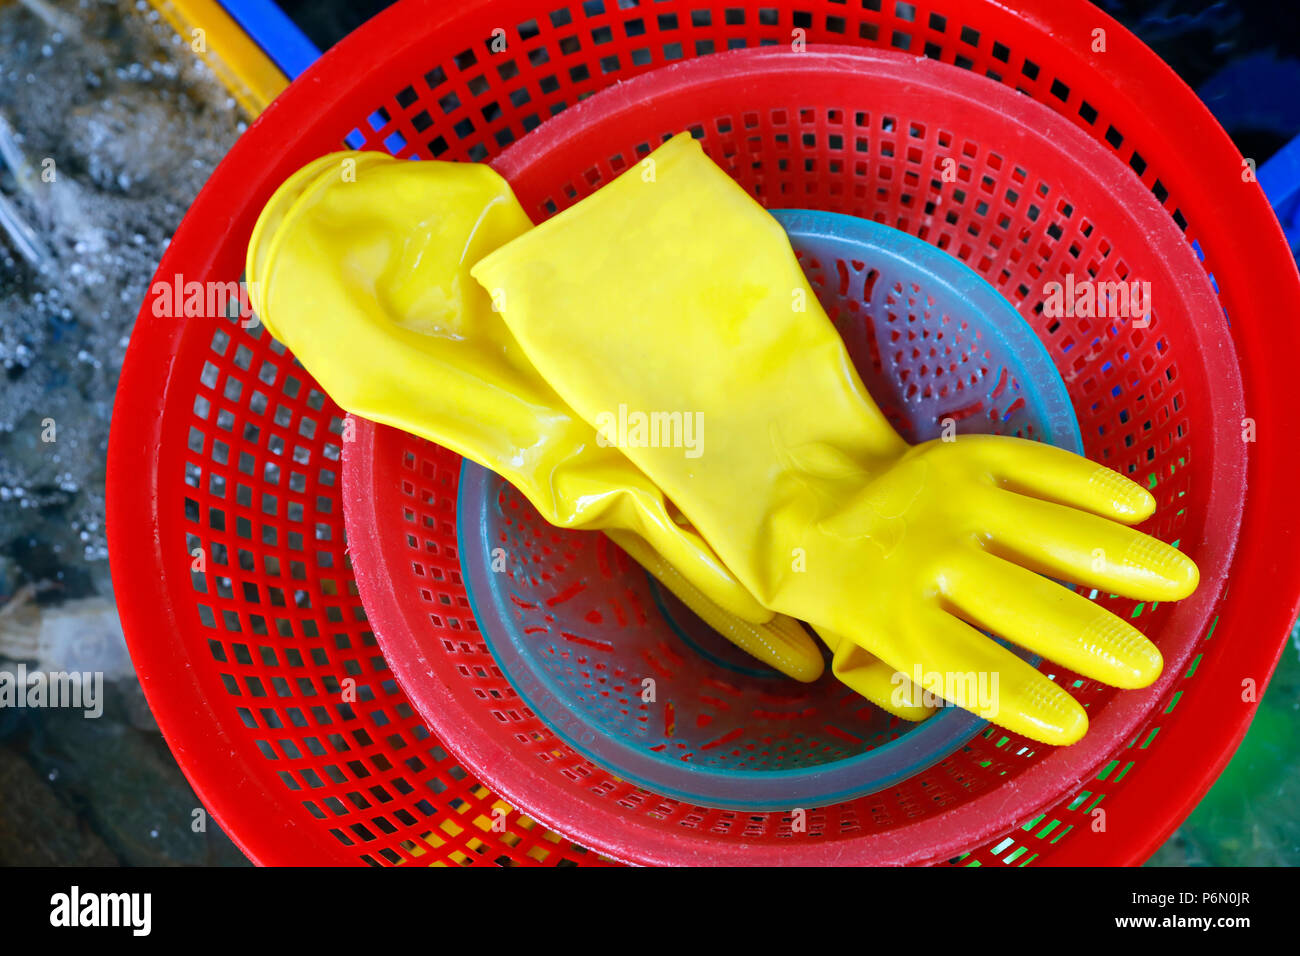 Fish market.  Yellow rubber gloves  in red basket.  Vung Tau. Vietnam. Stock Photo